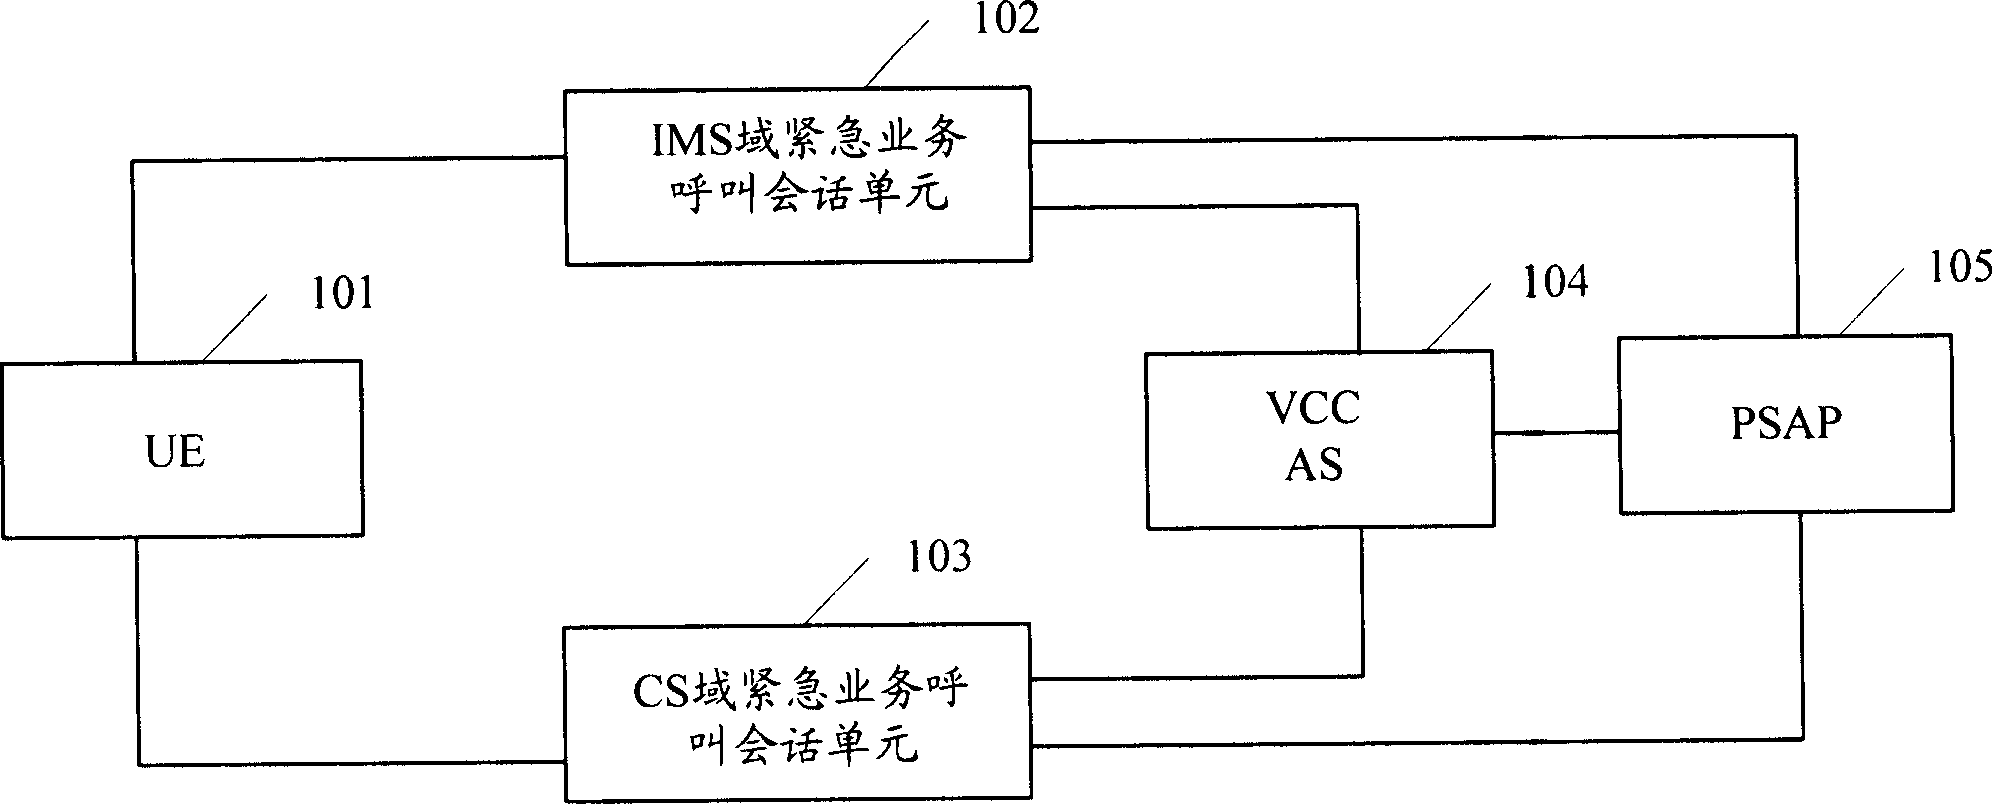 A method and system for realizing continuous voice call in emergent service